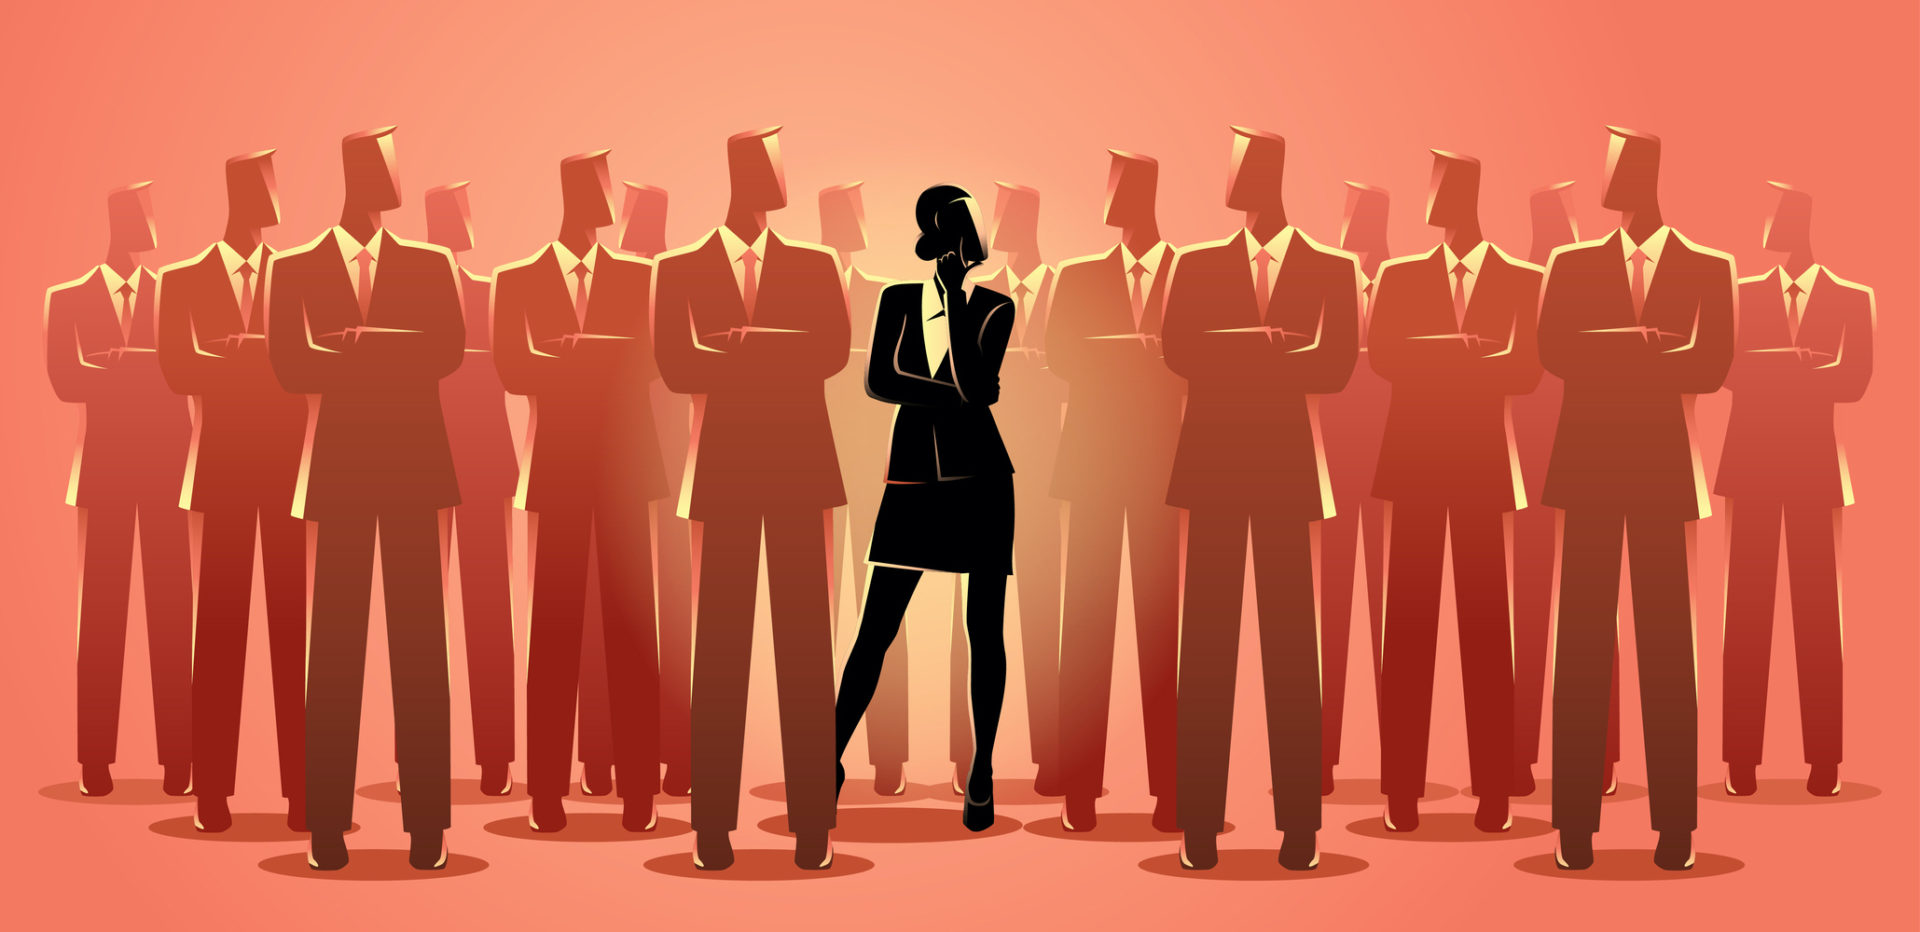 Business concept vector illustration of a businesswoman standing among businessmen. Living in a man's world concept.